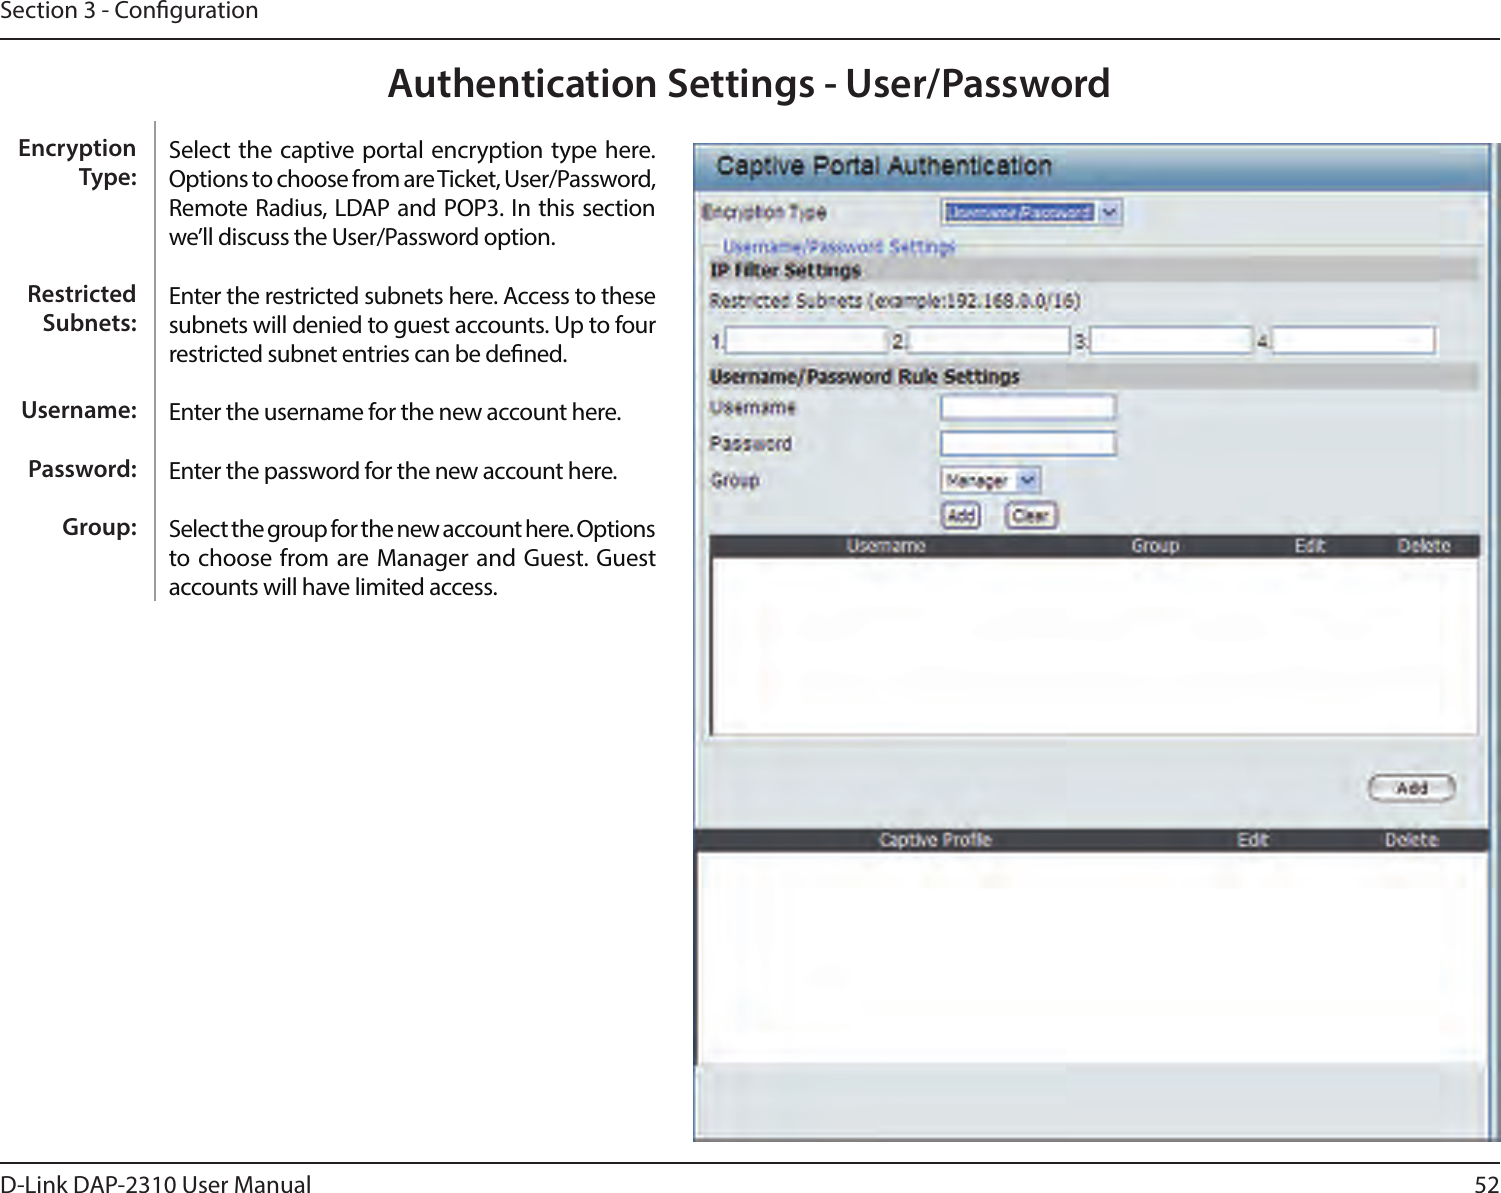 52D-Link DAP-2310 User ManualSection 3 - CongurationAuthentication Settings - User/PasswordSelect the captive portal encryption type here. Options to choose from are Ticket, User/Password, Remote Radius, LDAP and POP3. In this section we’ll discuss the User/Password option.Enter the restricted subnets here. Access to these subnets will denied to guest accounts. Up to four restricted subnet entries can be dened.Enter the username for the new account here.Enter the password for the new account here.Select the group for the new account here. Options to choose from are Manager and Guest. Guest accounts will have limited access.Encryption Type:Restricted Subnets:Username:Password:Group: